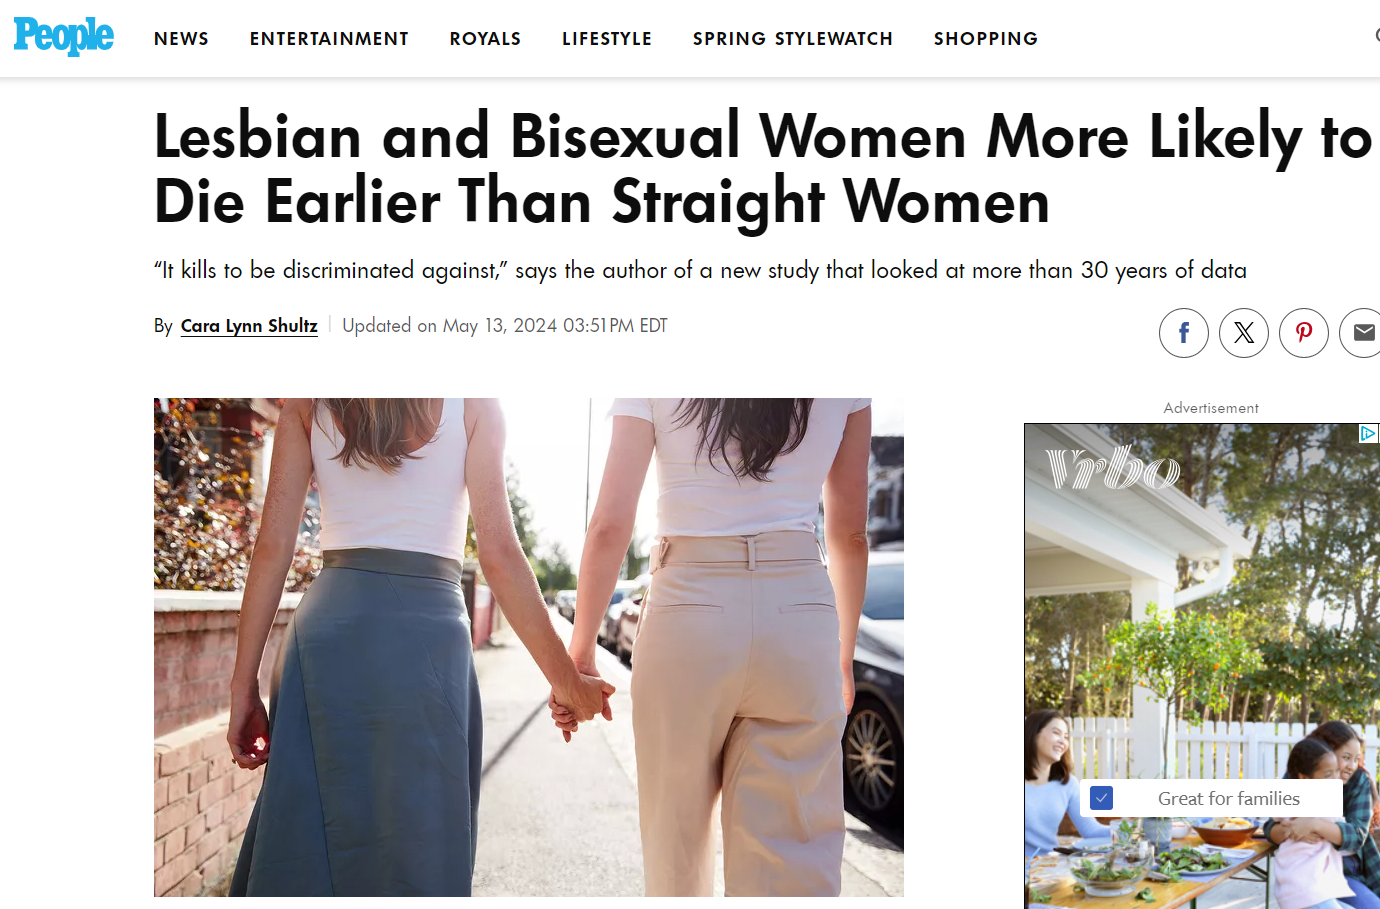 Press Release_People_Lesbian and Bisexual women more likely to die earlier than straight women.PNG